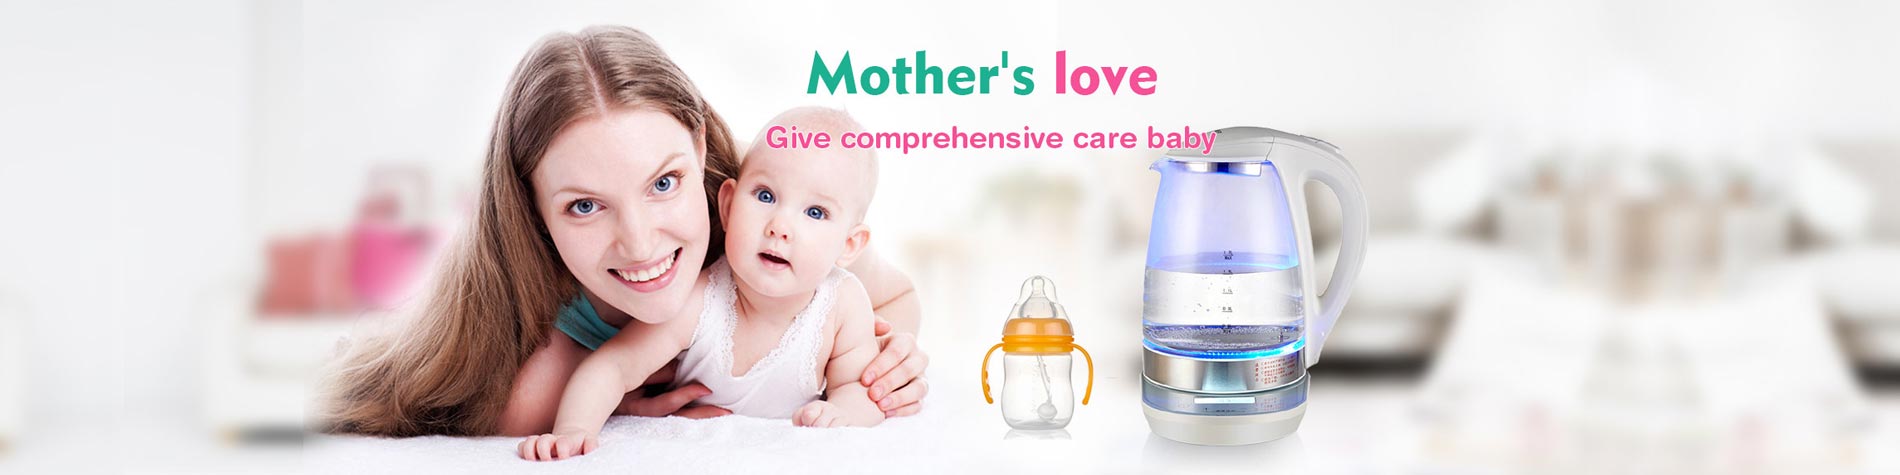 Fastest - Baby & Kids - Main Area - Mother Love